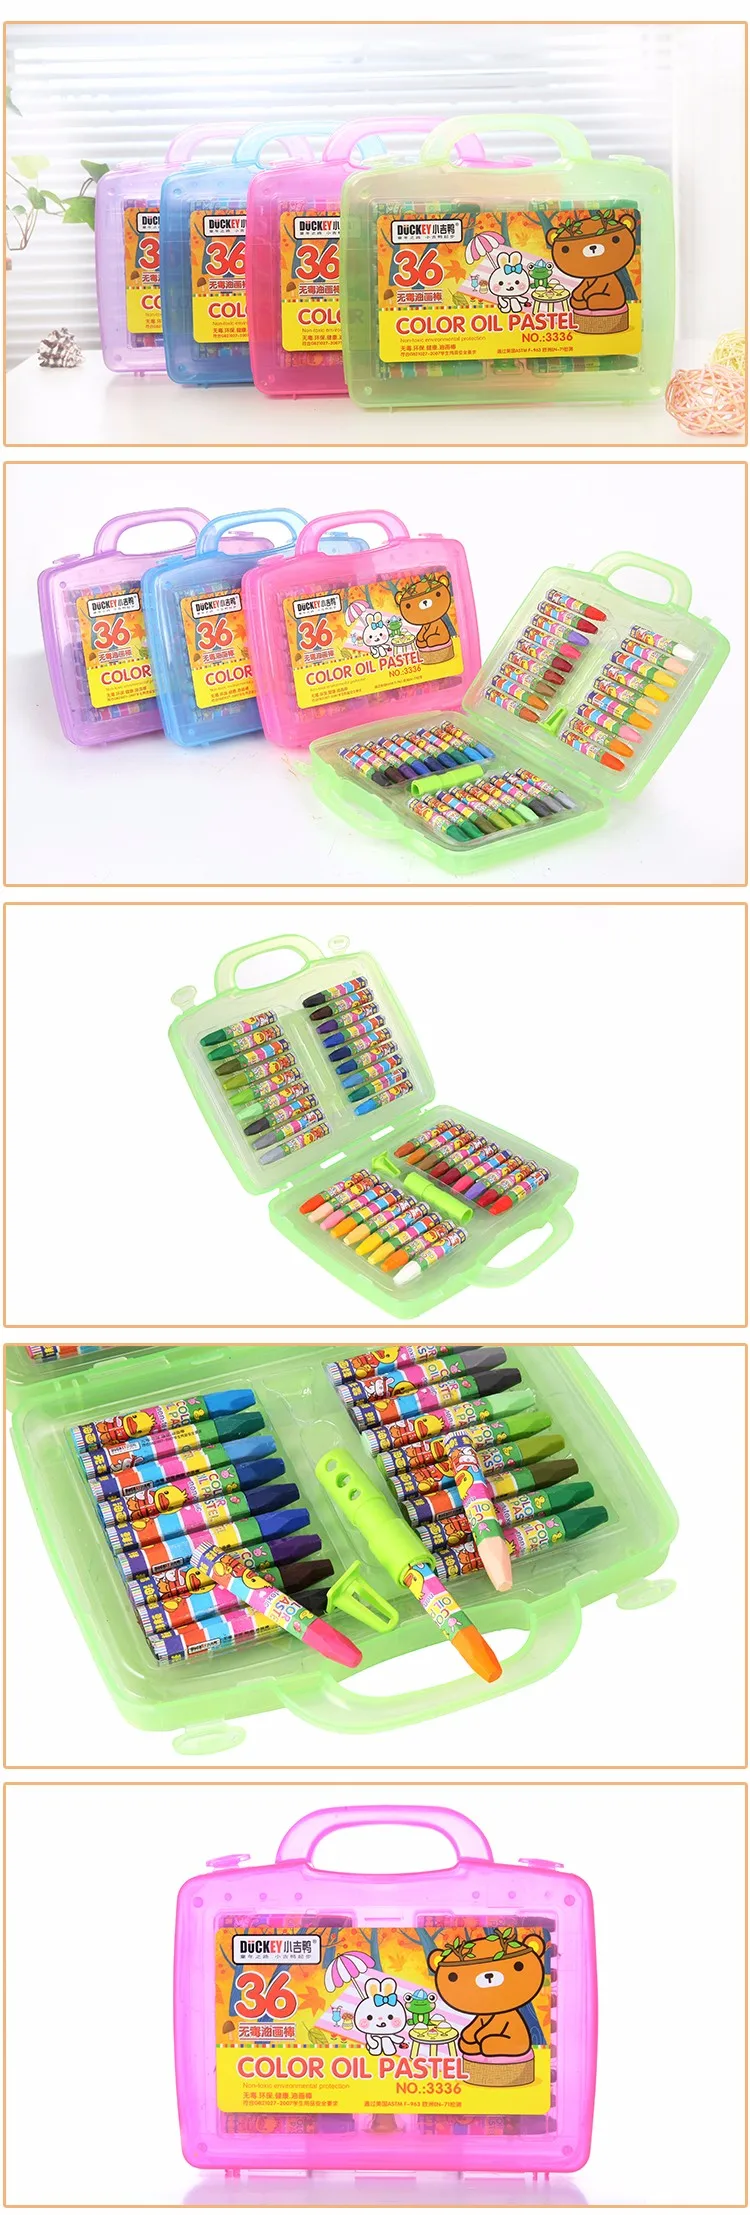 Duckey New arrival wholesale 36 color soft oil pastel for children